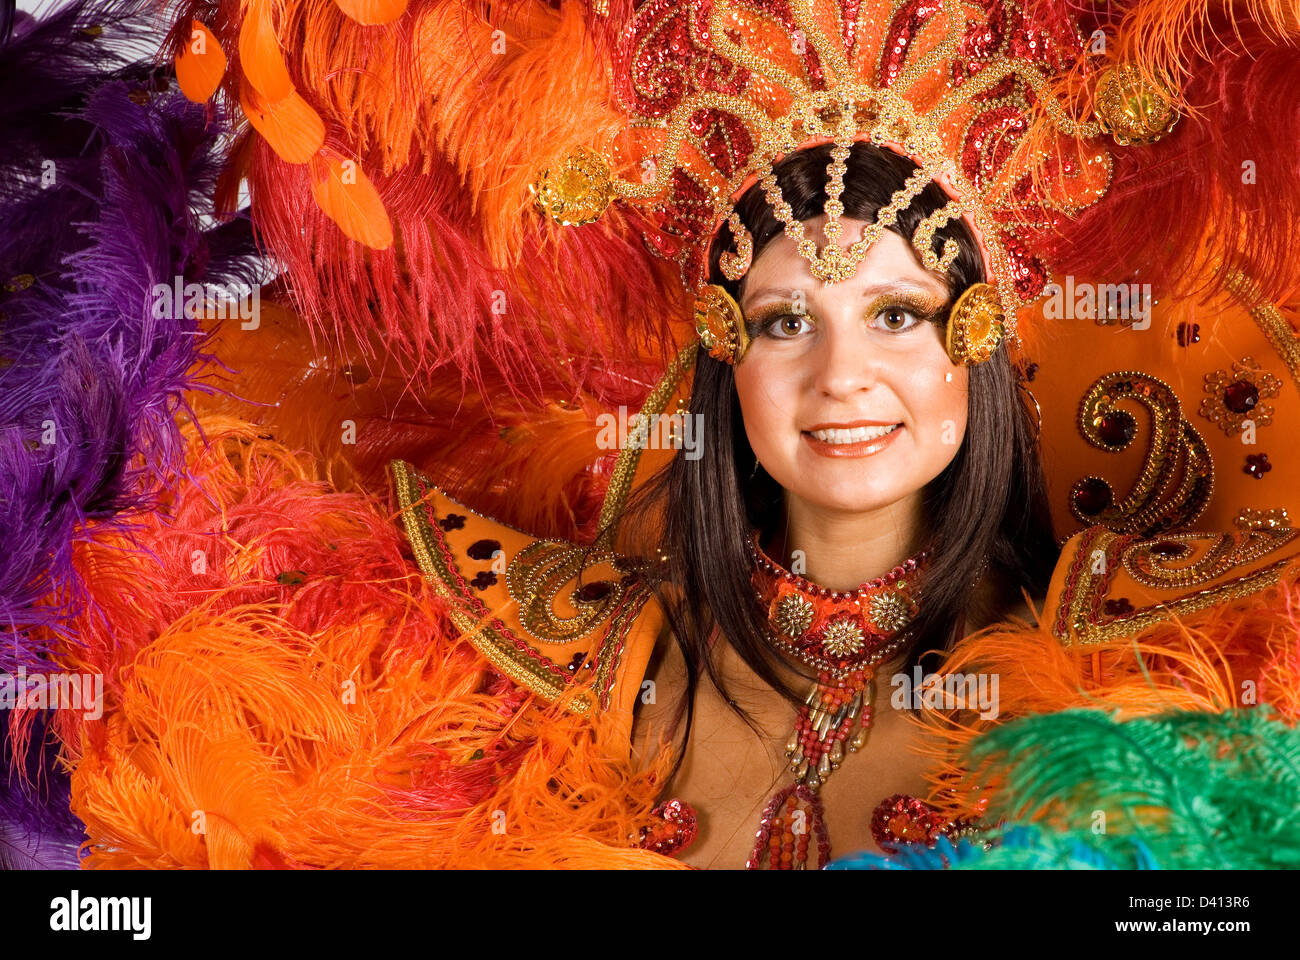 Portrait of young woman in colorful carnival costume, close up Stock Photo